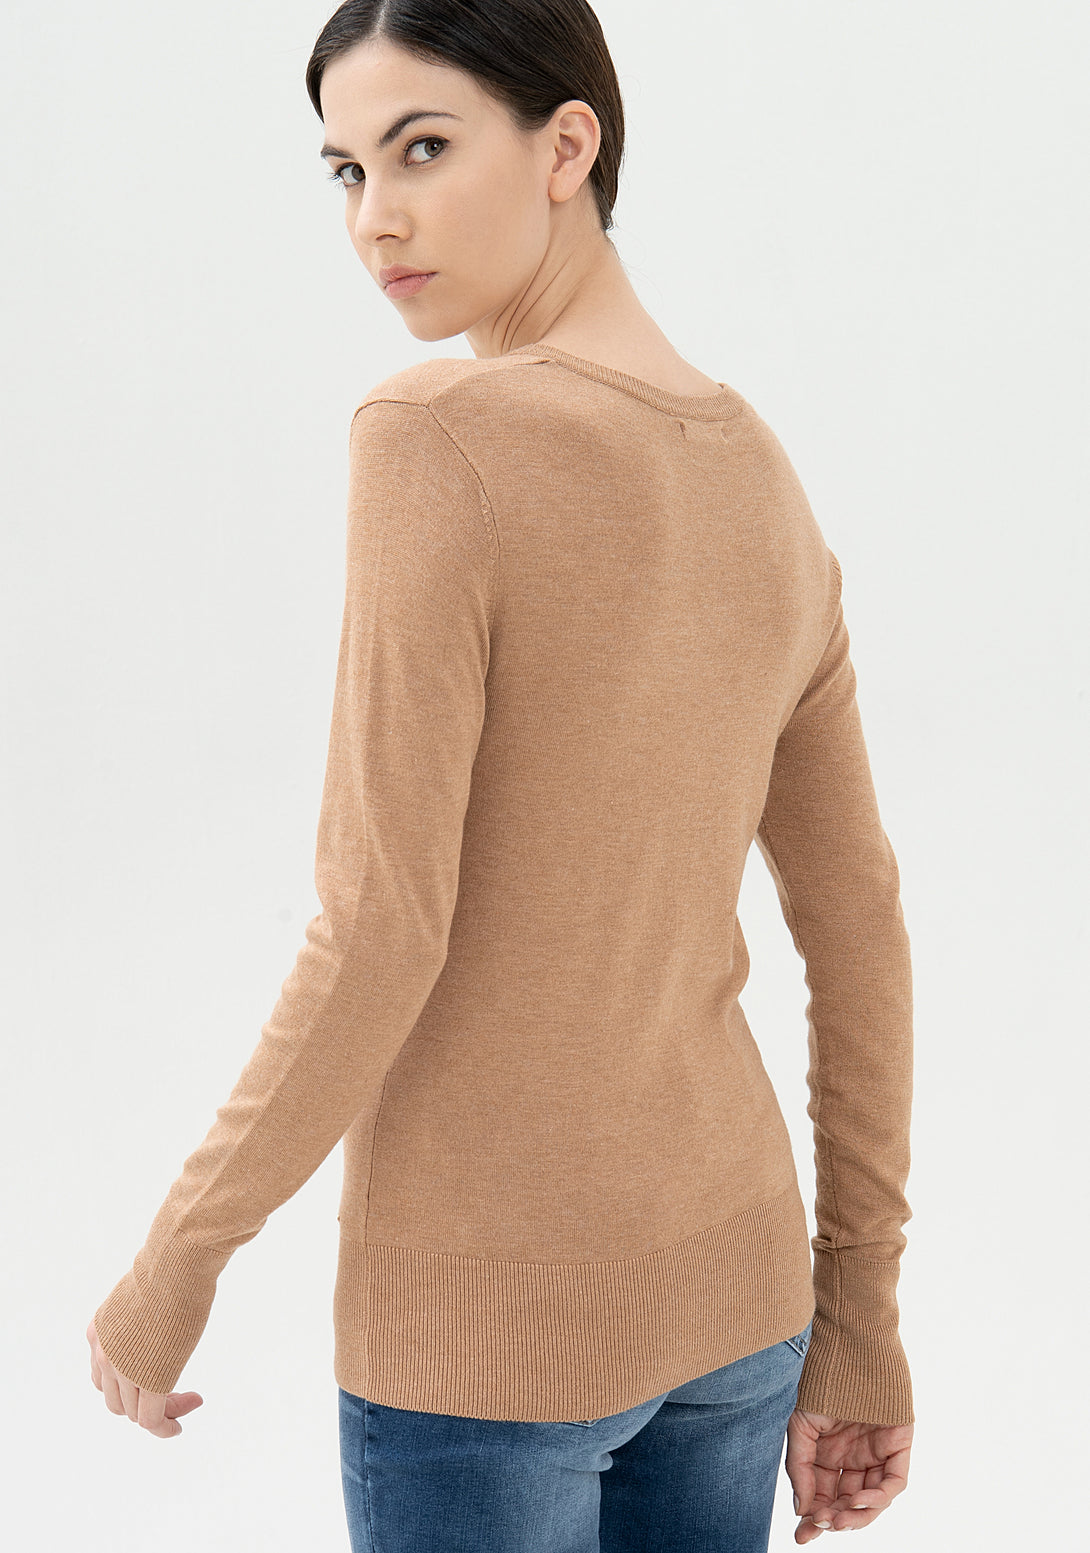 Knitwear tight fit with V-neck drop